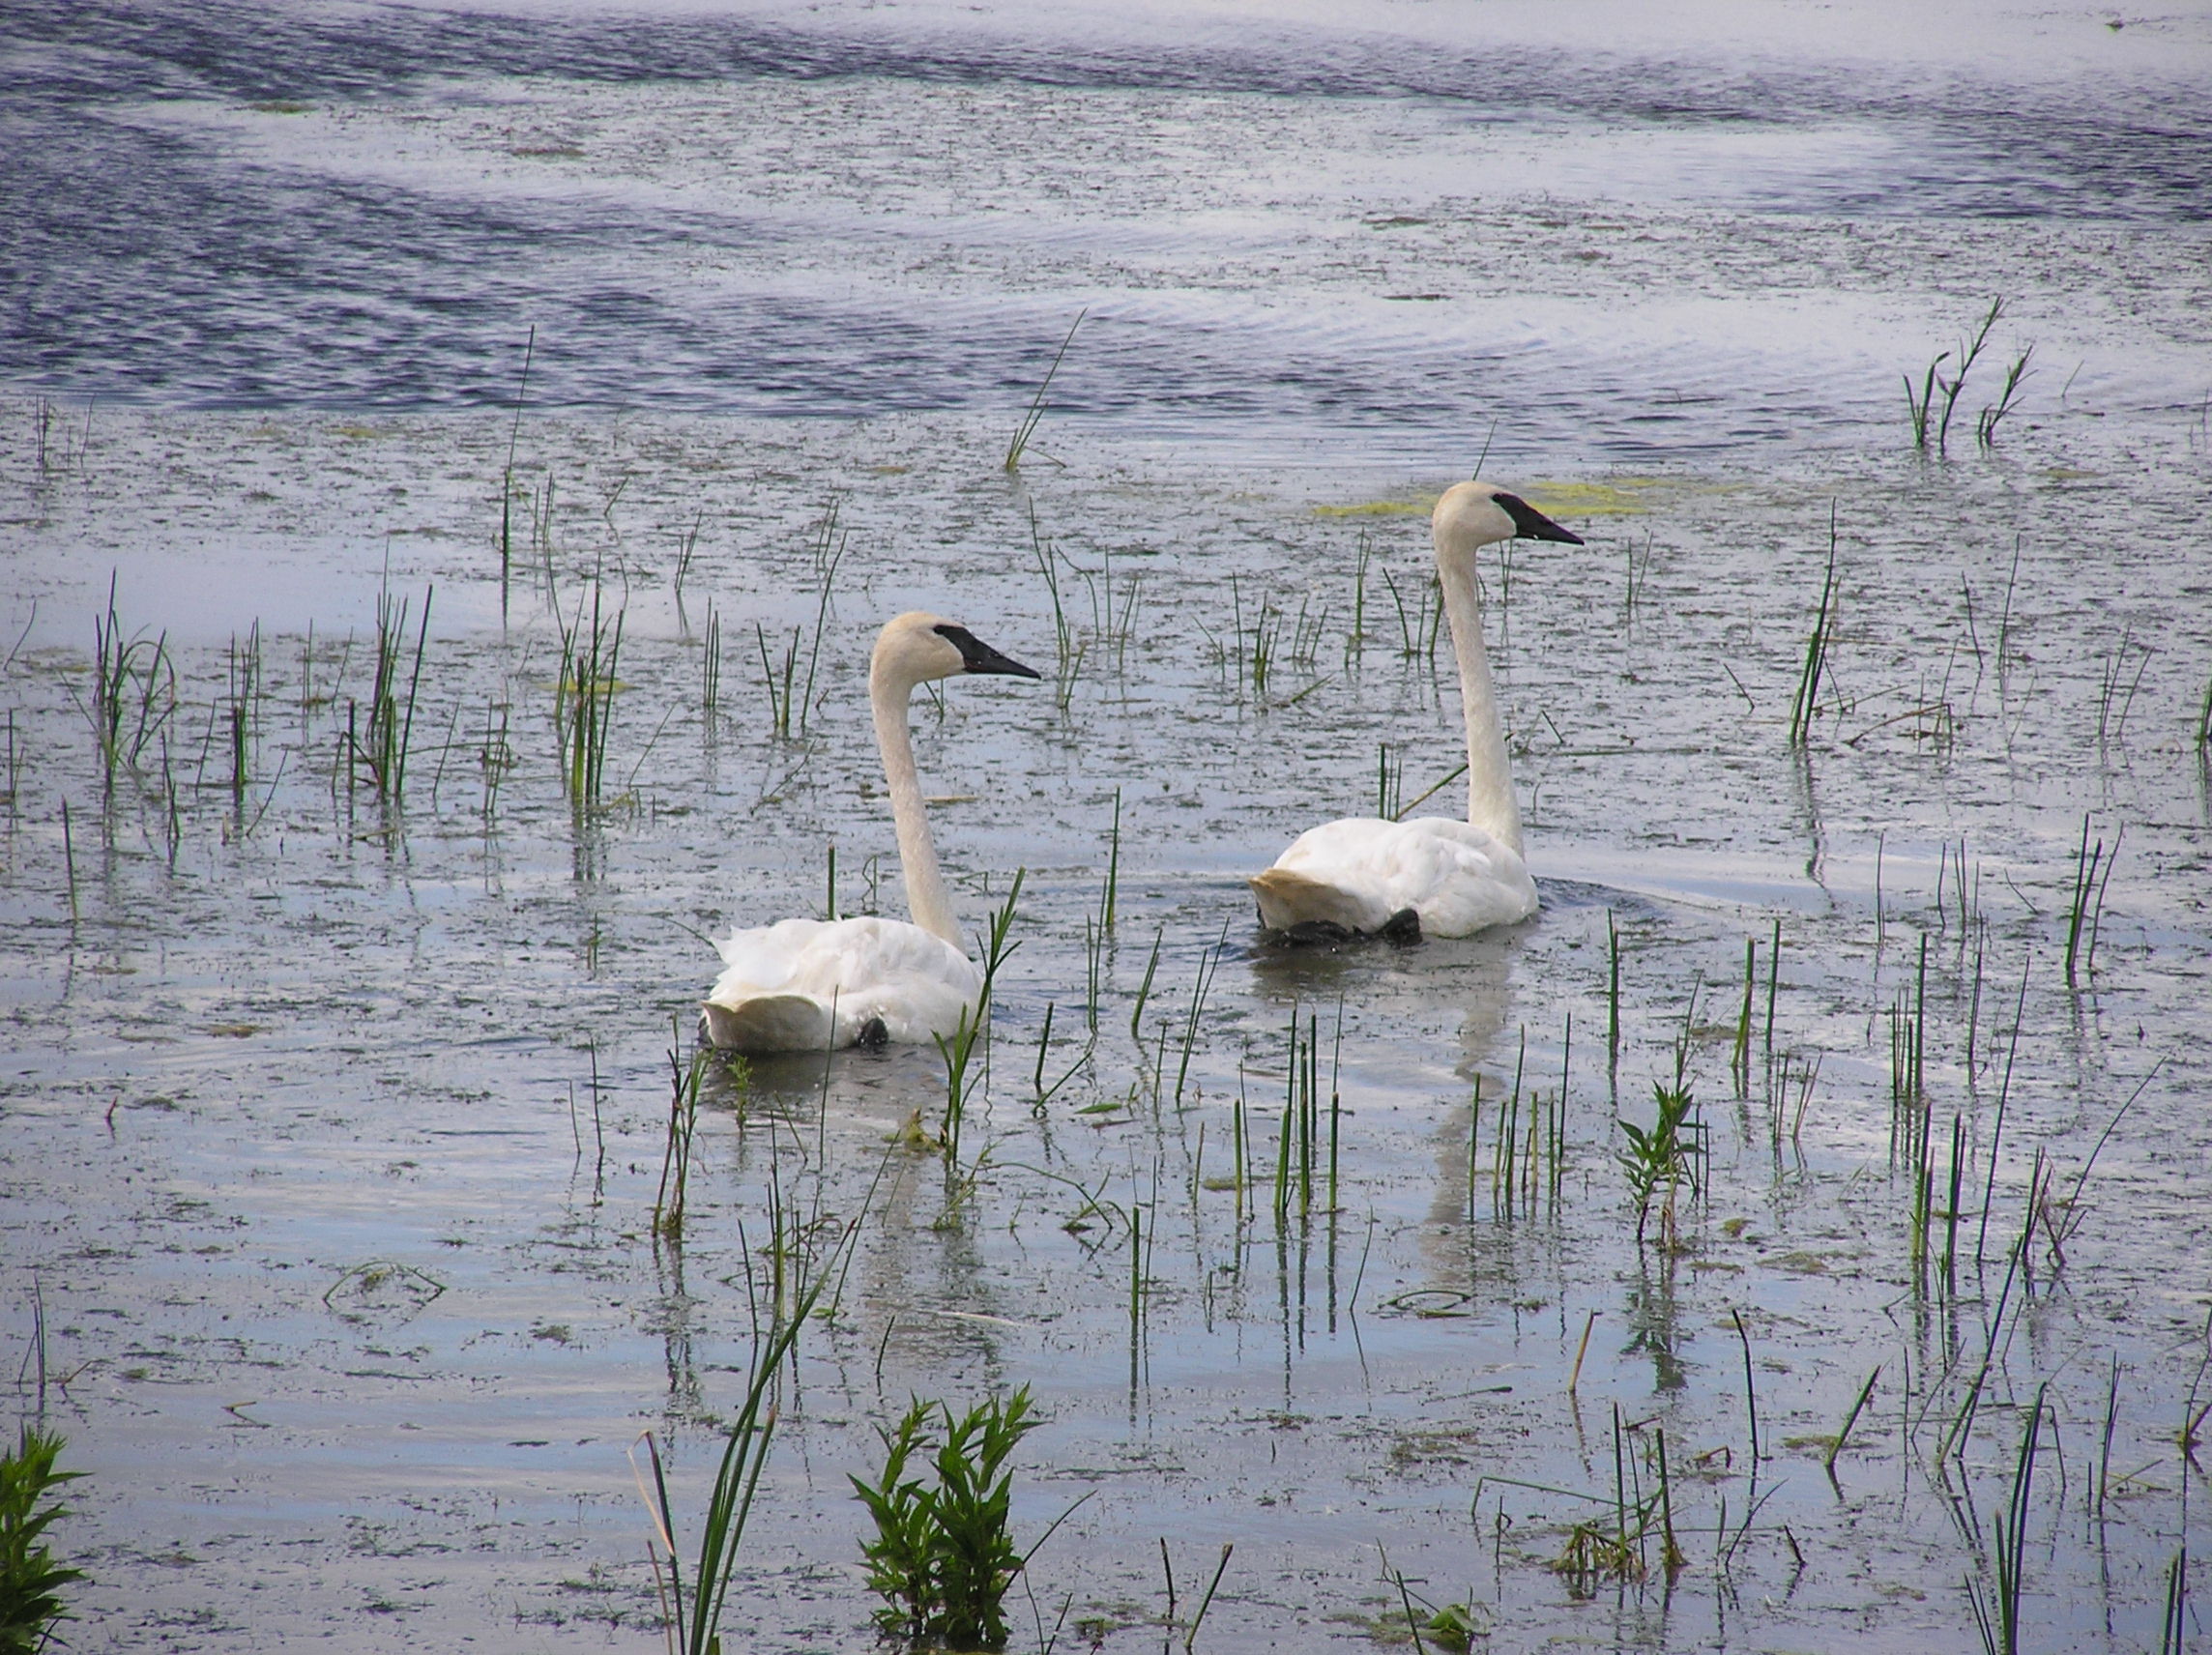 Trumpeter swans at Union Slough NWR